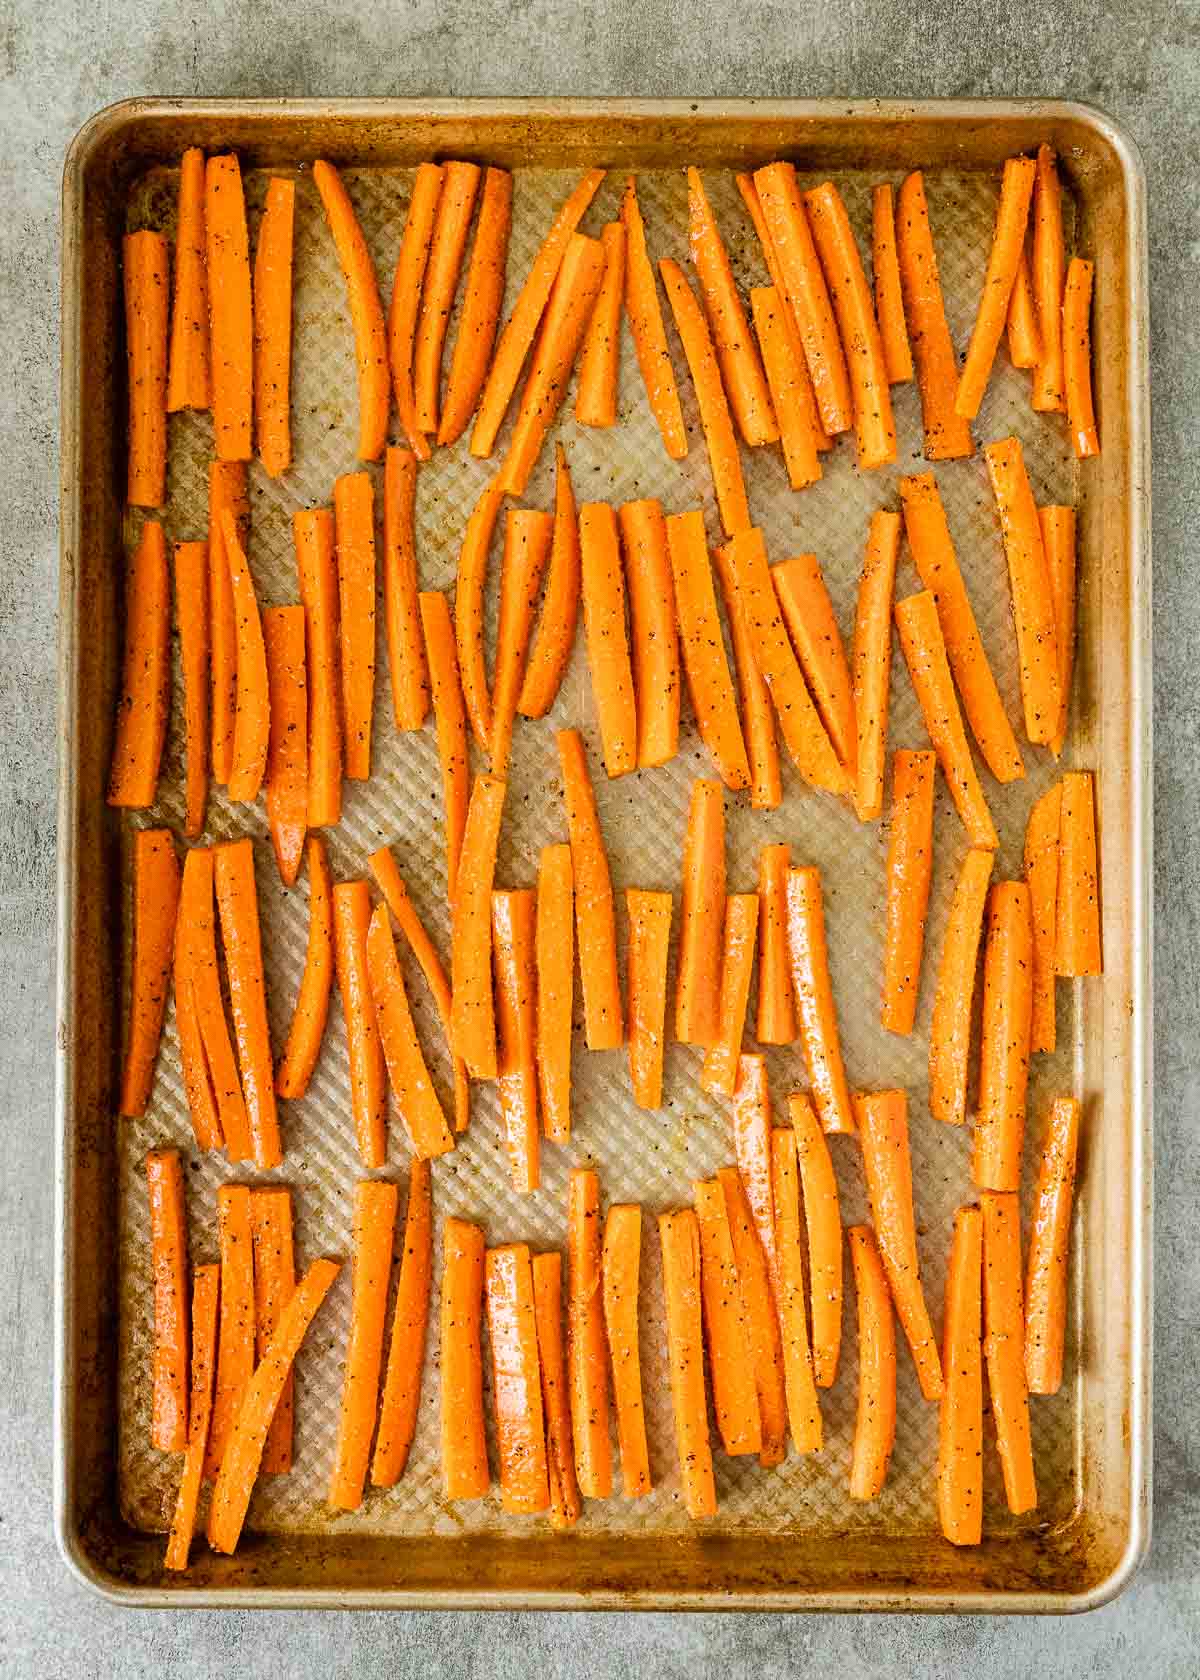 Roasted Carrot Fries, raw on the baking sheet